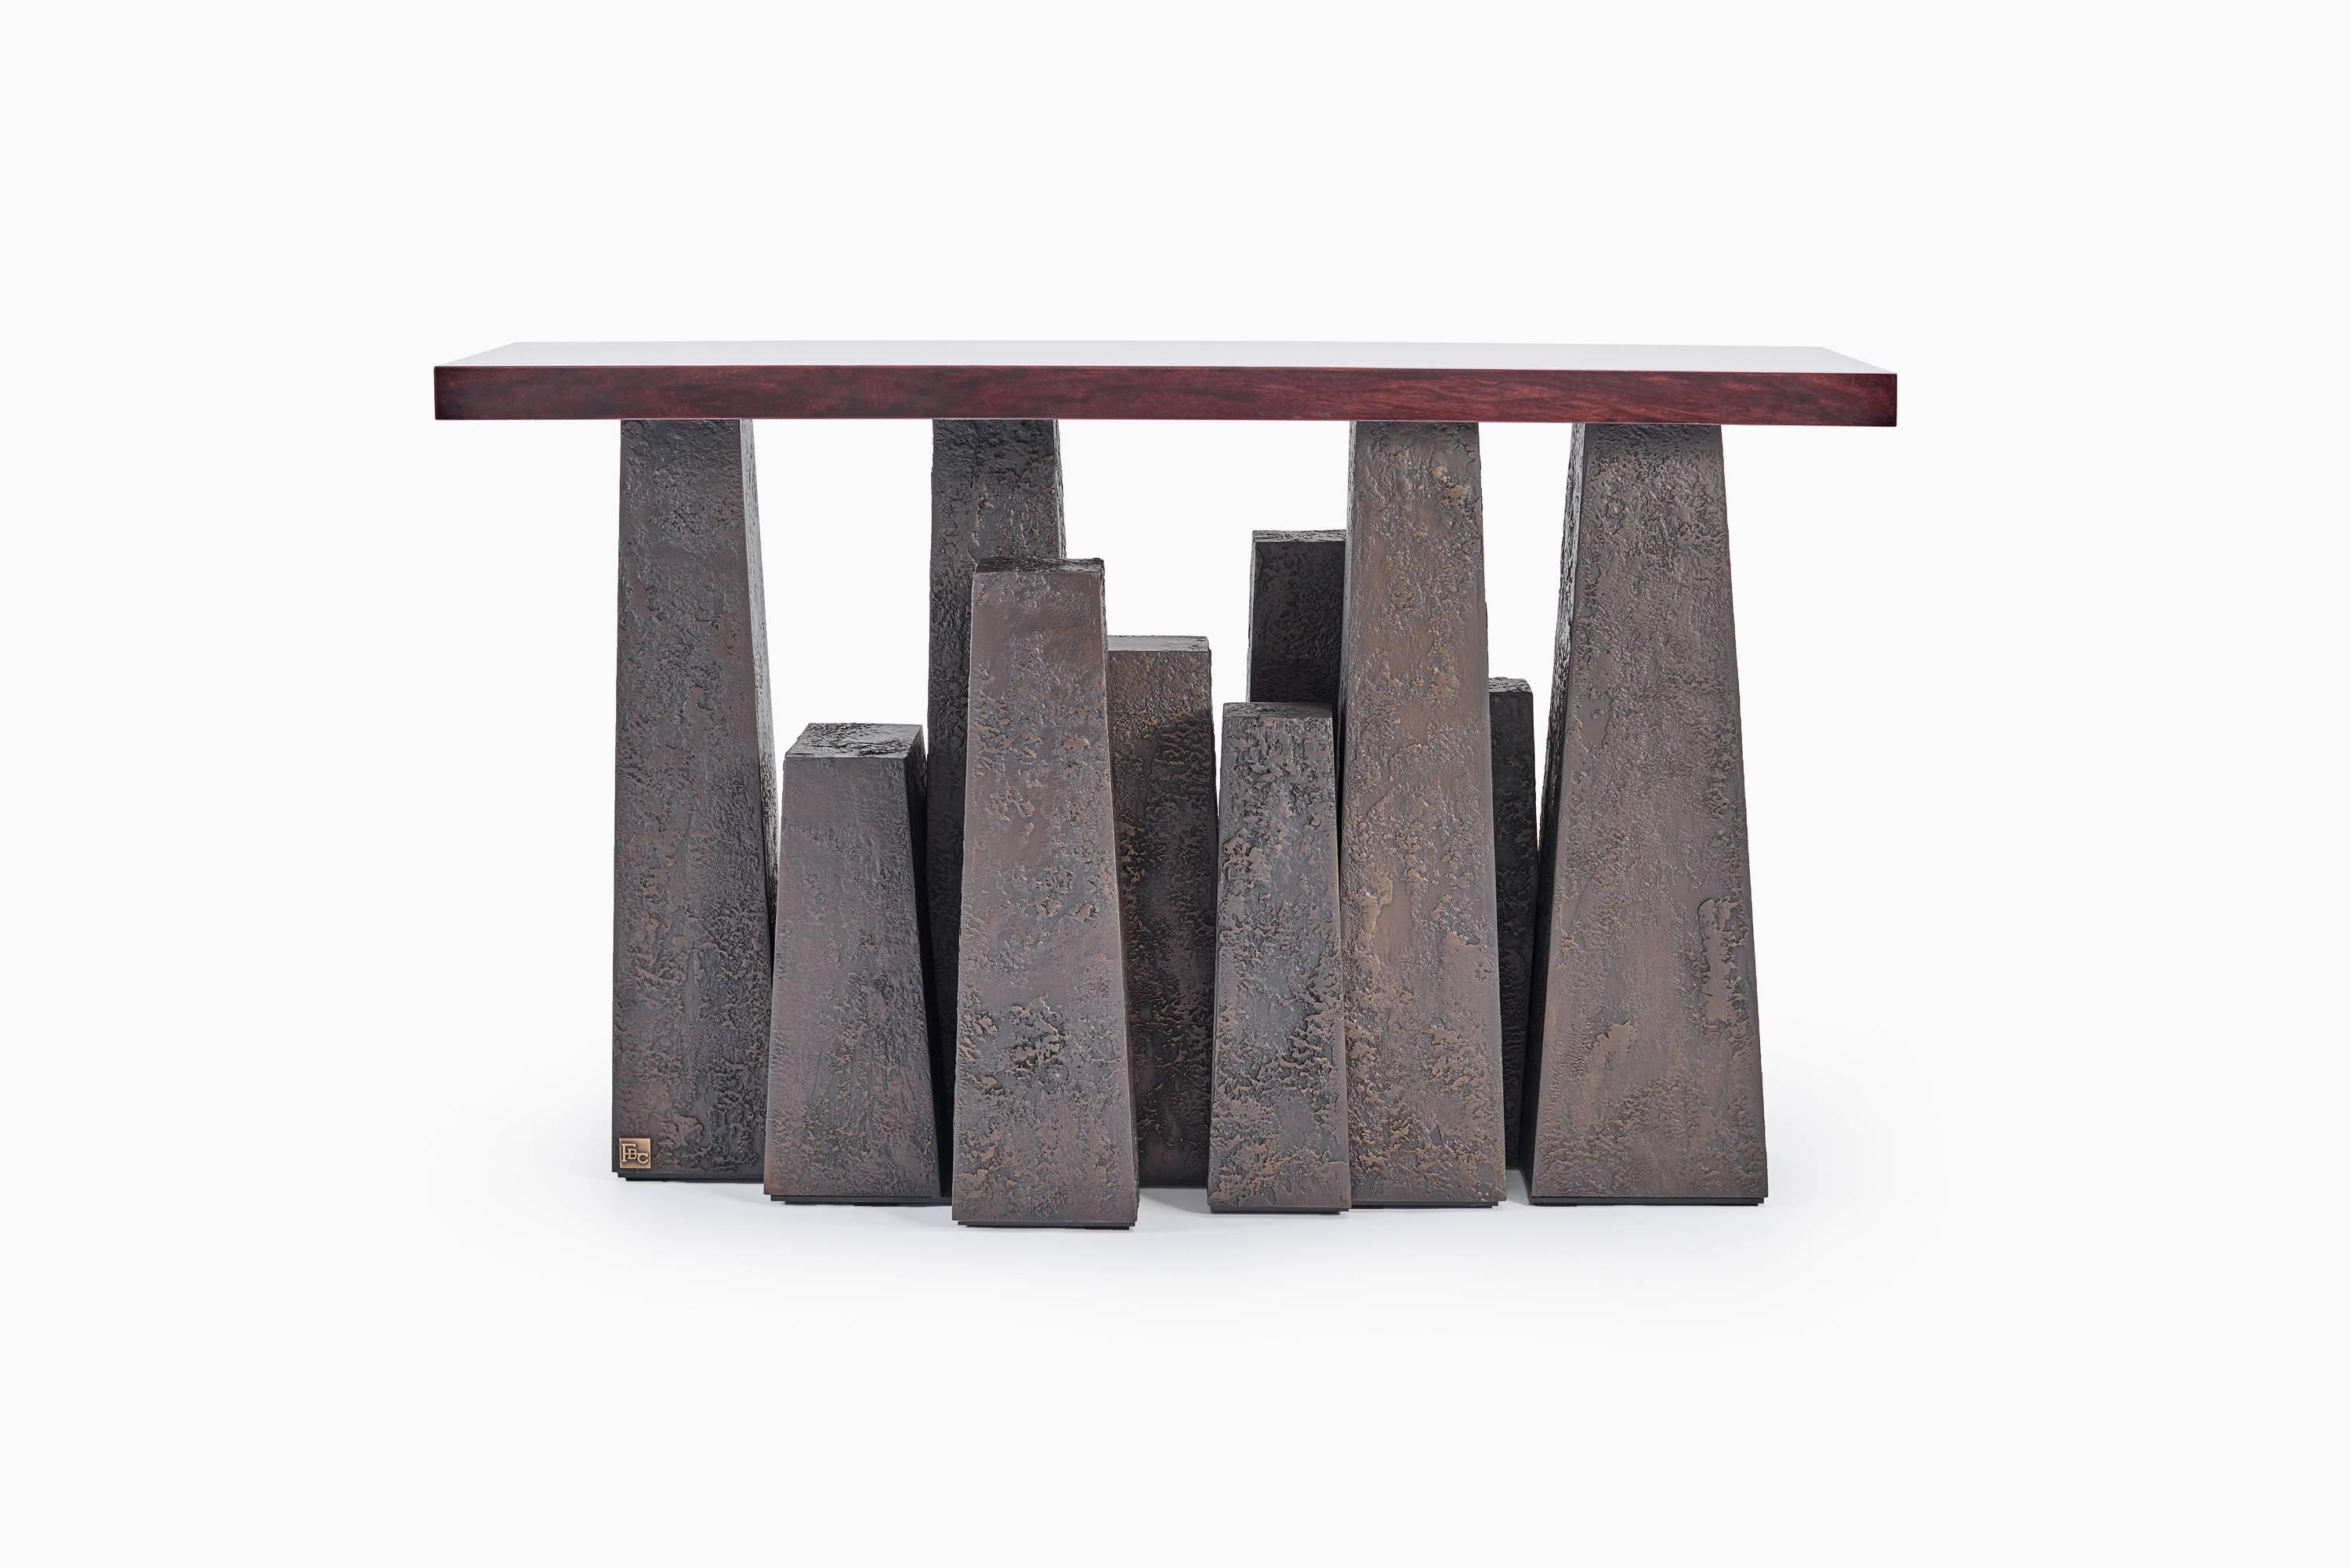 The Housesteads console takes inspiration from the ancient Roman Fort, Housesteads, remains of which can be found along Hadrian's Wall in Northumberland. Like many of our consoles this piece is composed of timber and cast bronze and therefore has a